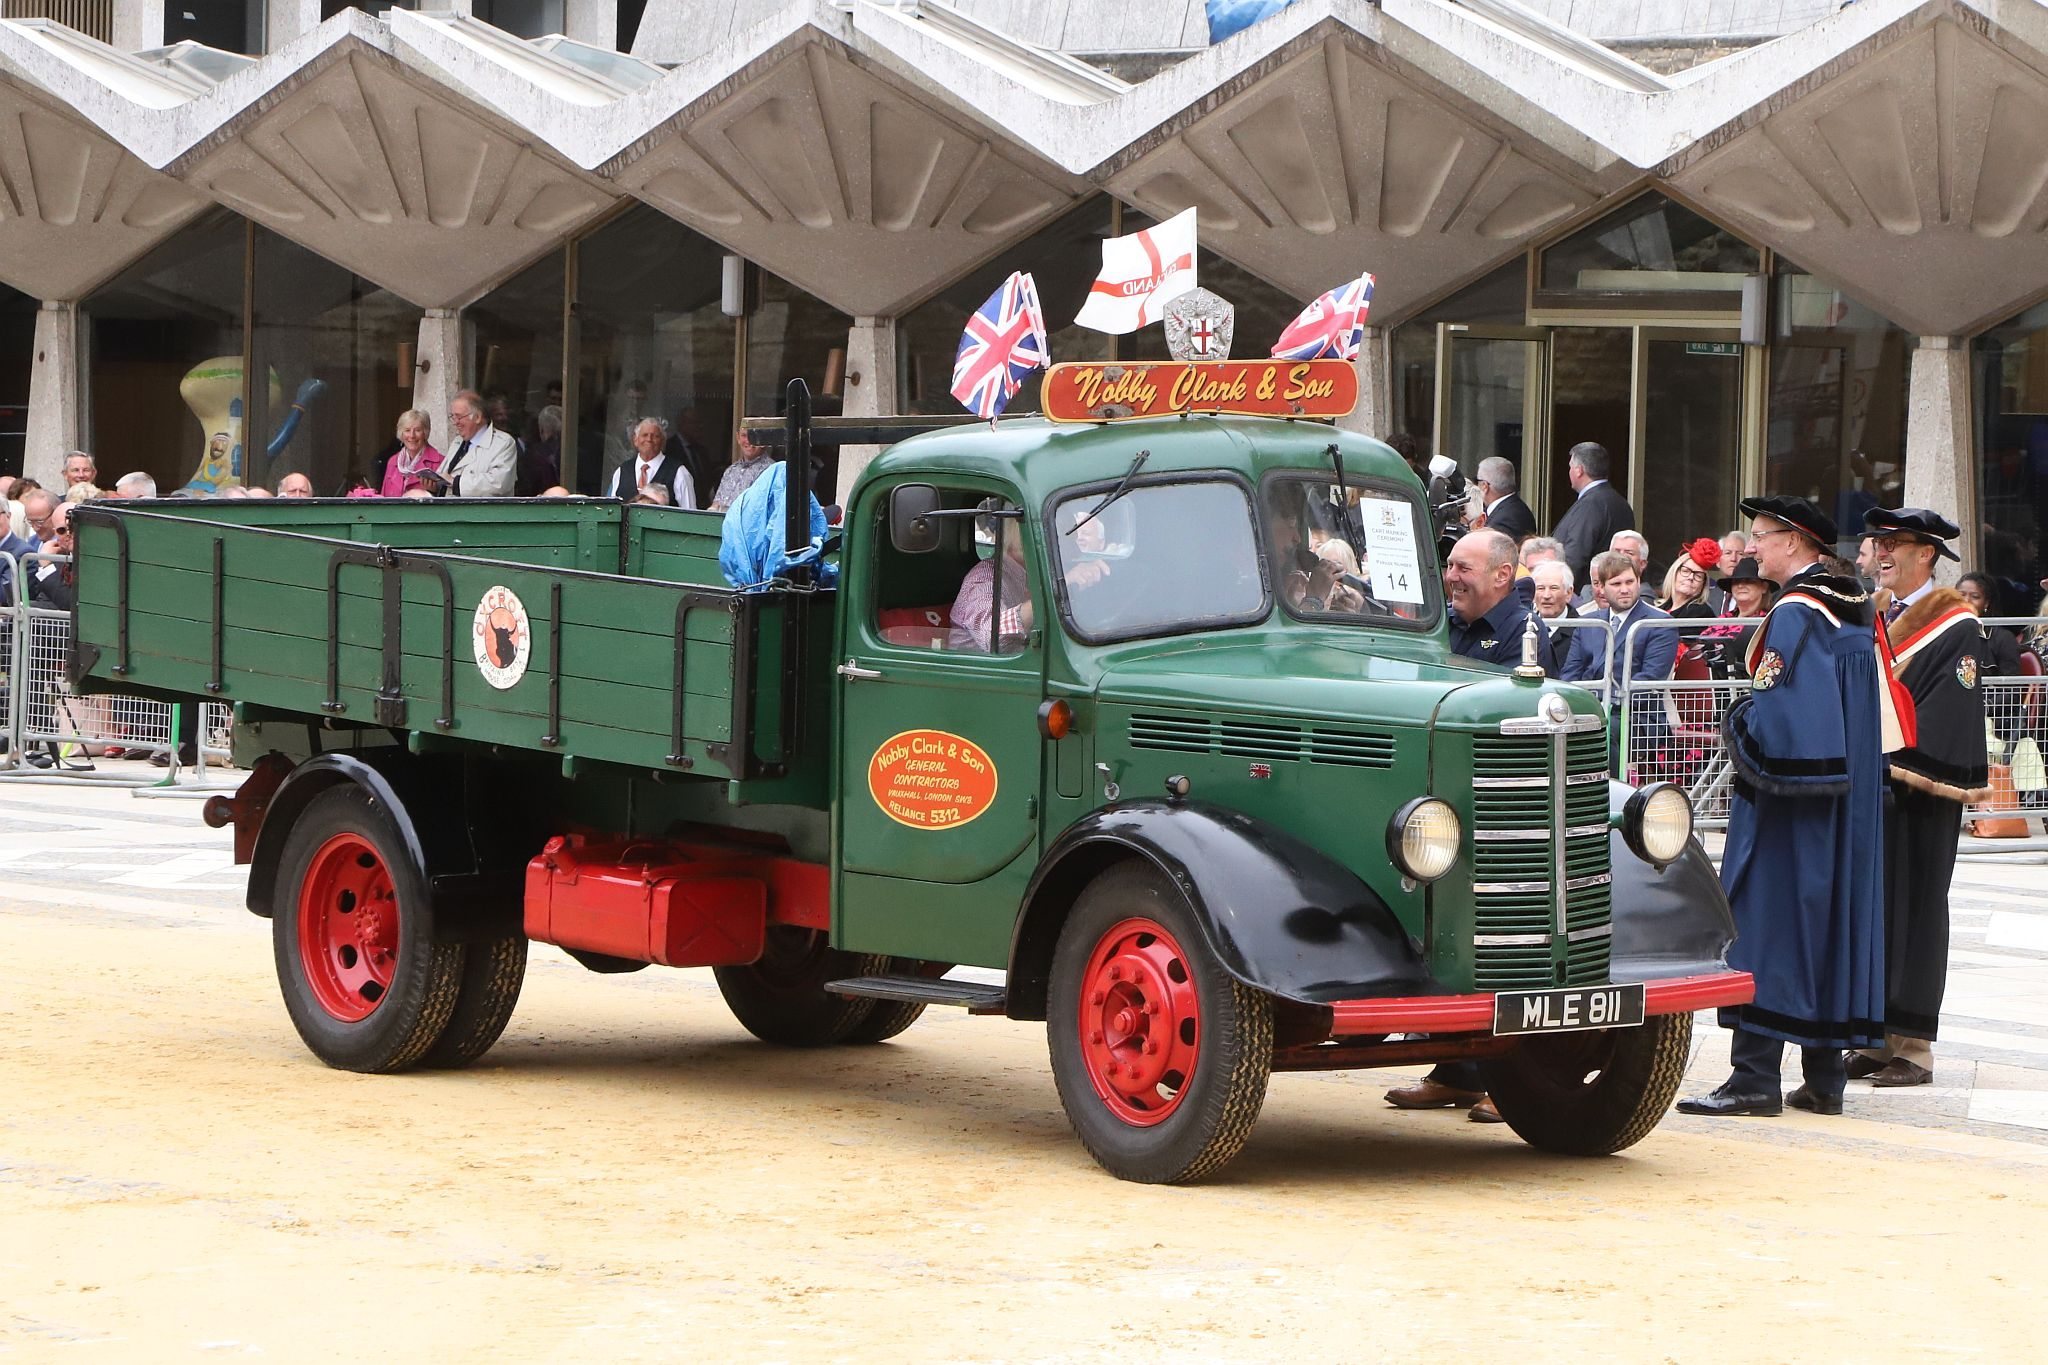 Bedford M Type 1953, MLE811. City of London 2023 Cart Marking in Guildhall Yard on 22-Jul-2023. Hosted by the Worshipful Company of Carmen with the Lord Mayor of the City of London in attendance. Wooden plates on the vehicles are branded with hot irons to allow them to ply for trade in the Square Mile. Another of the City Livery Company's annual ceremonies.